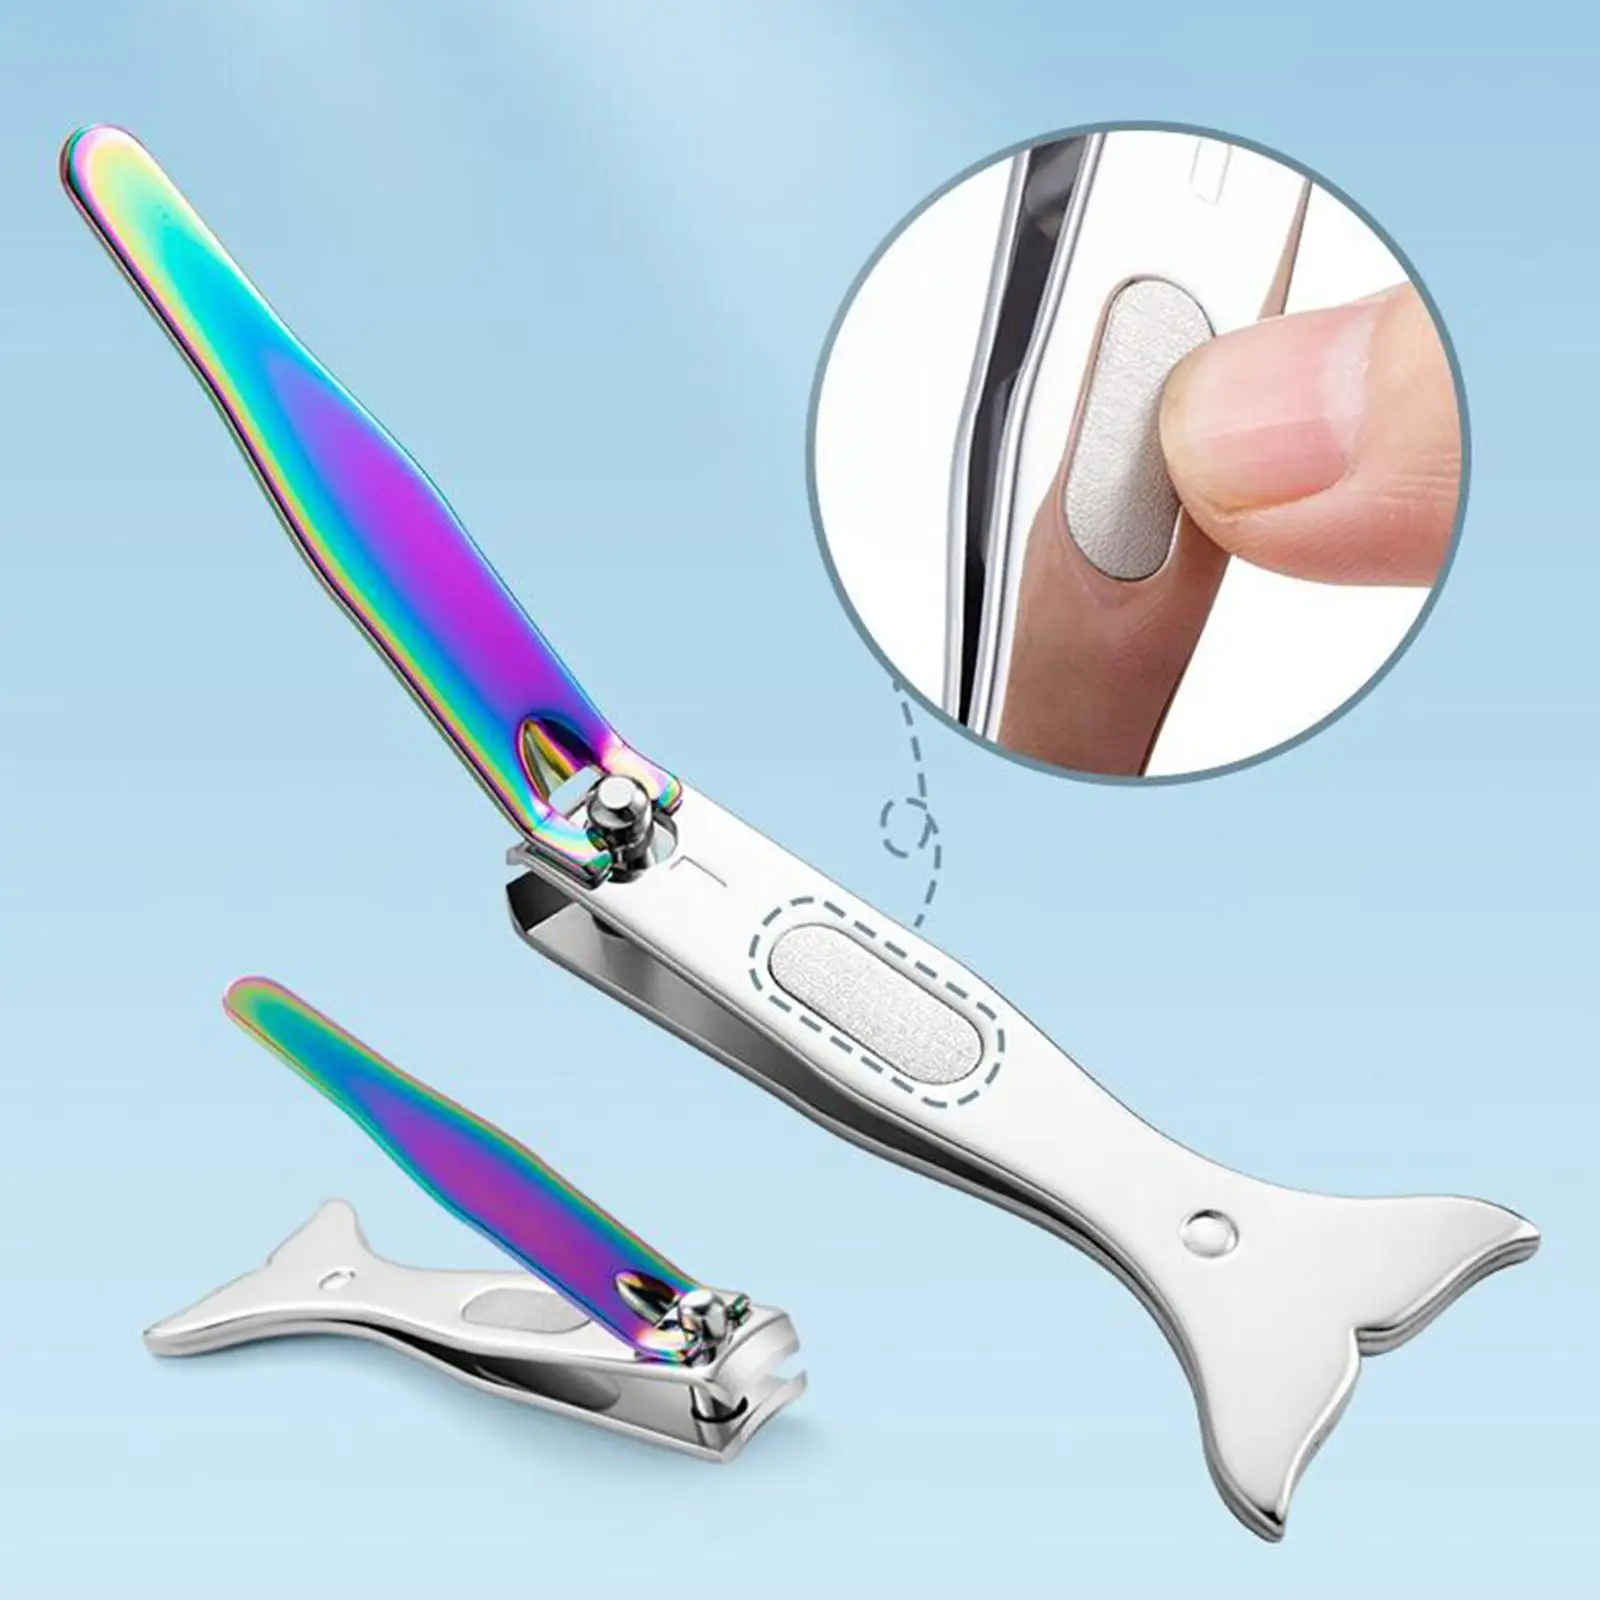 Mermaid Nail Clippers Nail Care Tools Cuticle Remover Nippers Remover for Fingernails Toenails Cuticle Care Women Gifts Adult